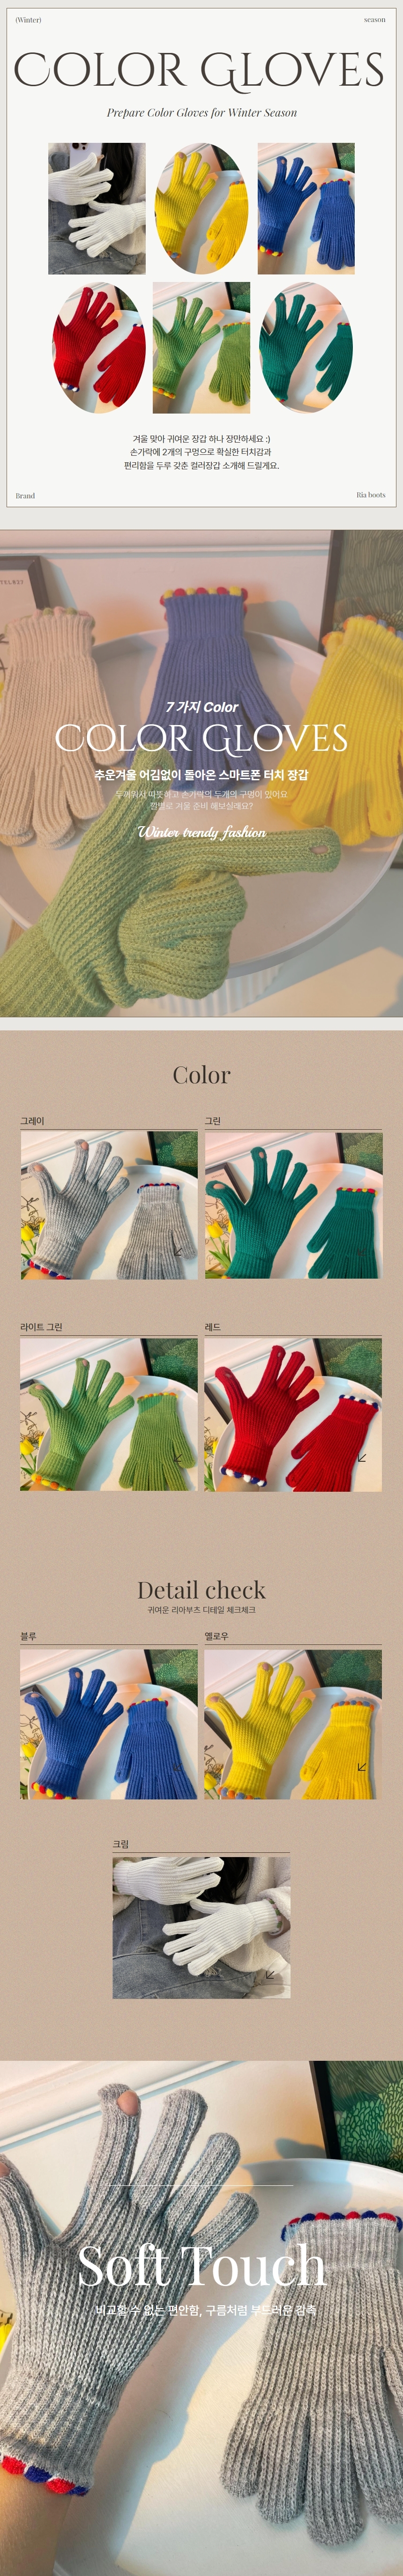 Smartphone%20Touch%20color%20gloves_detail.jpg